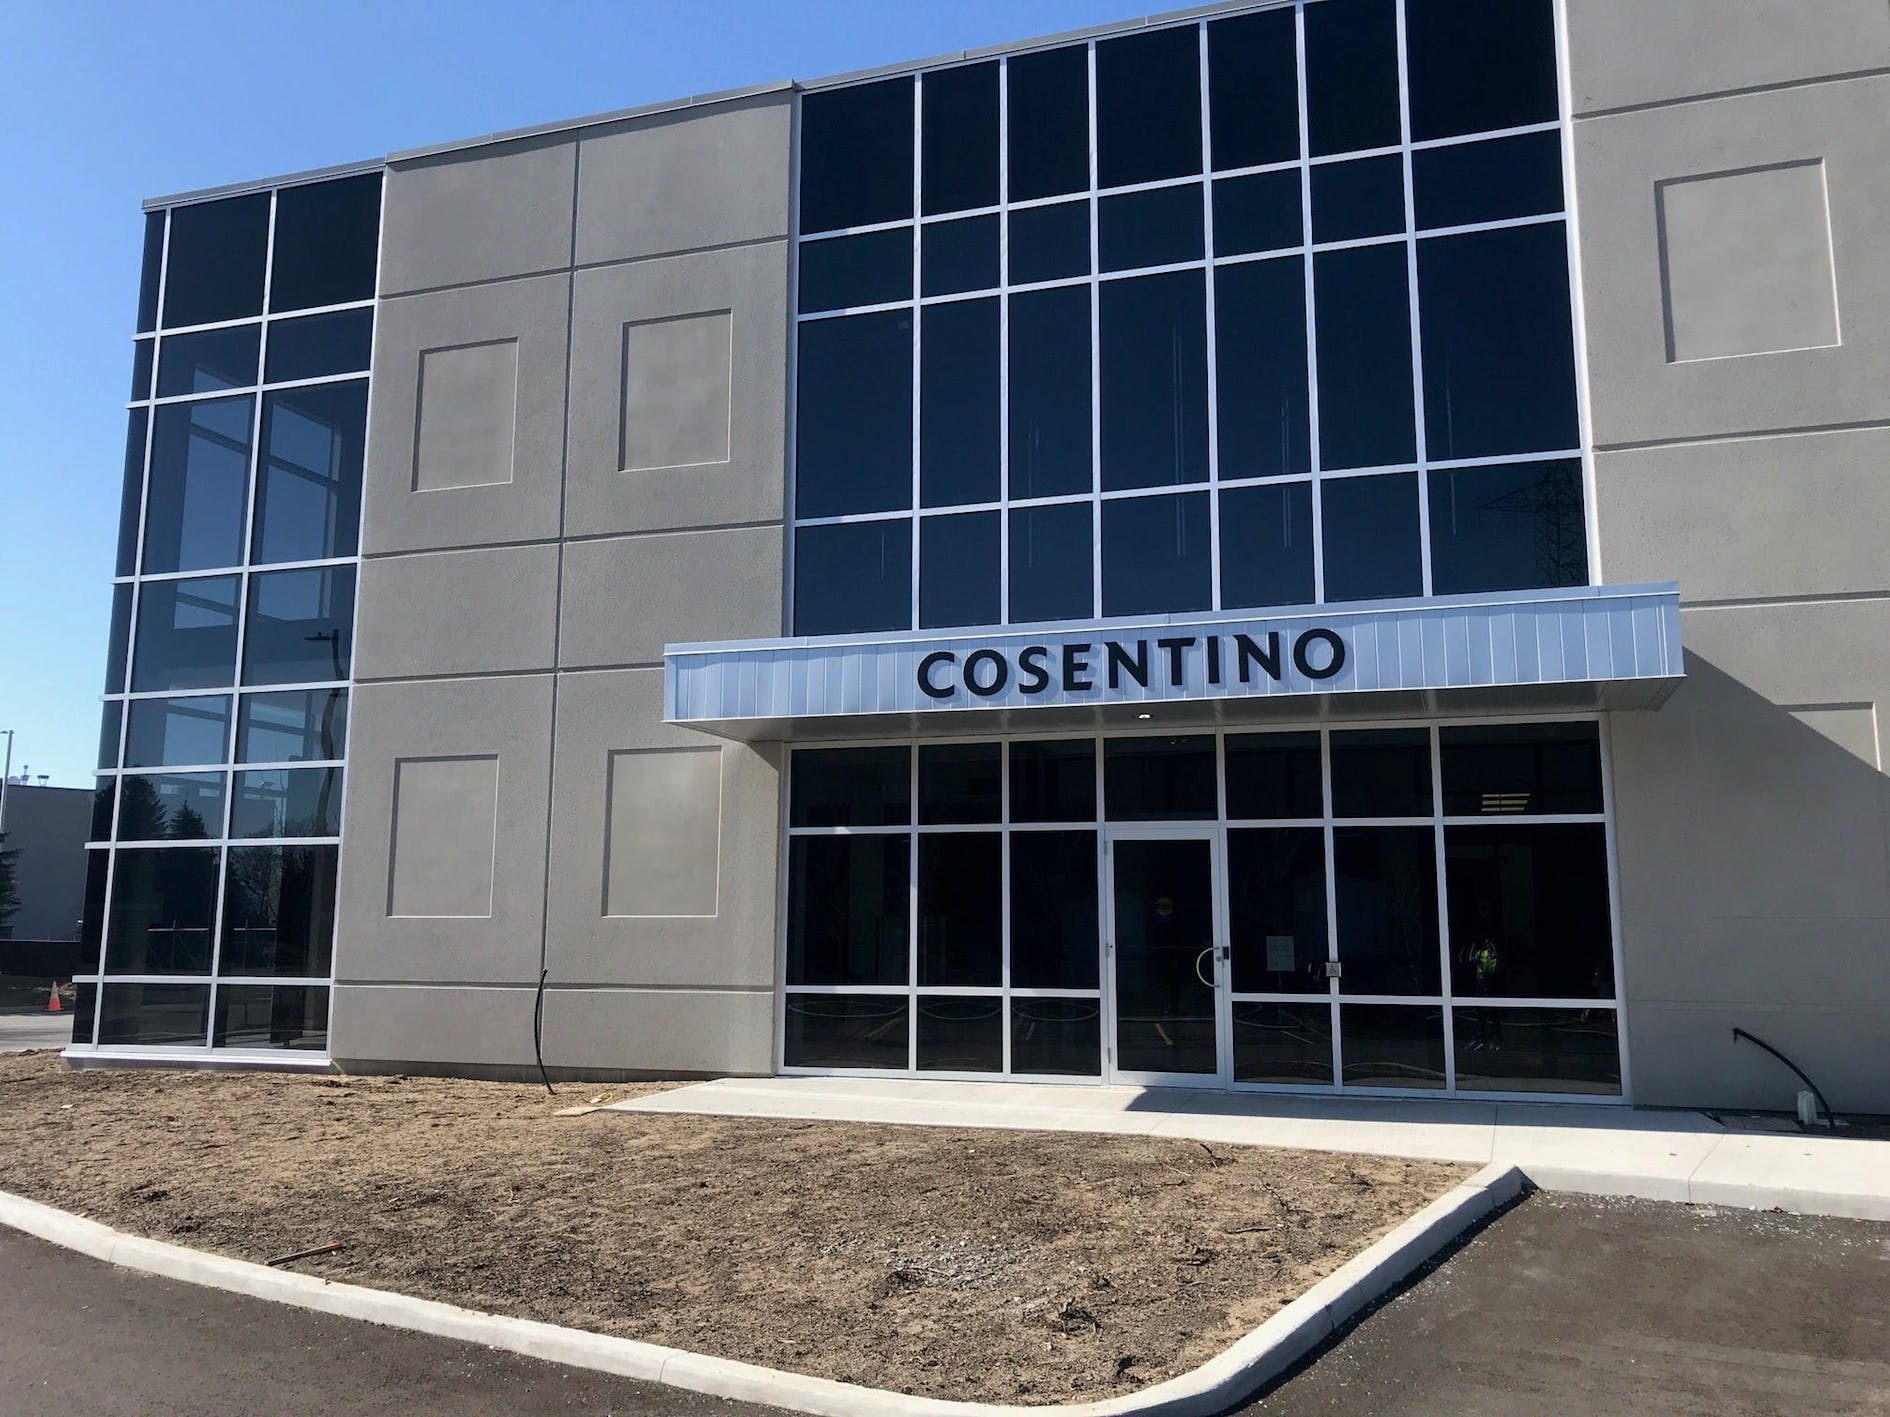 Image 33 of Cosentino Center Ottawa 5 in Cosentino takes a step forward in its international expansion - Cosentino